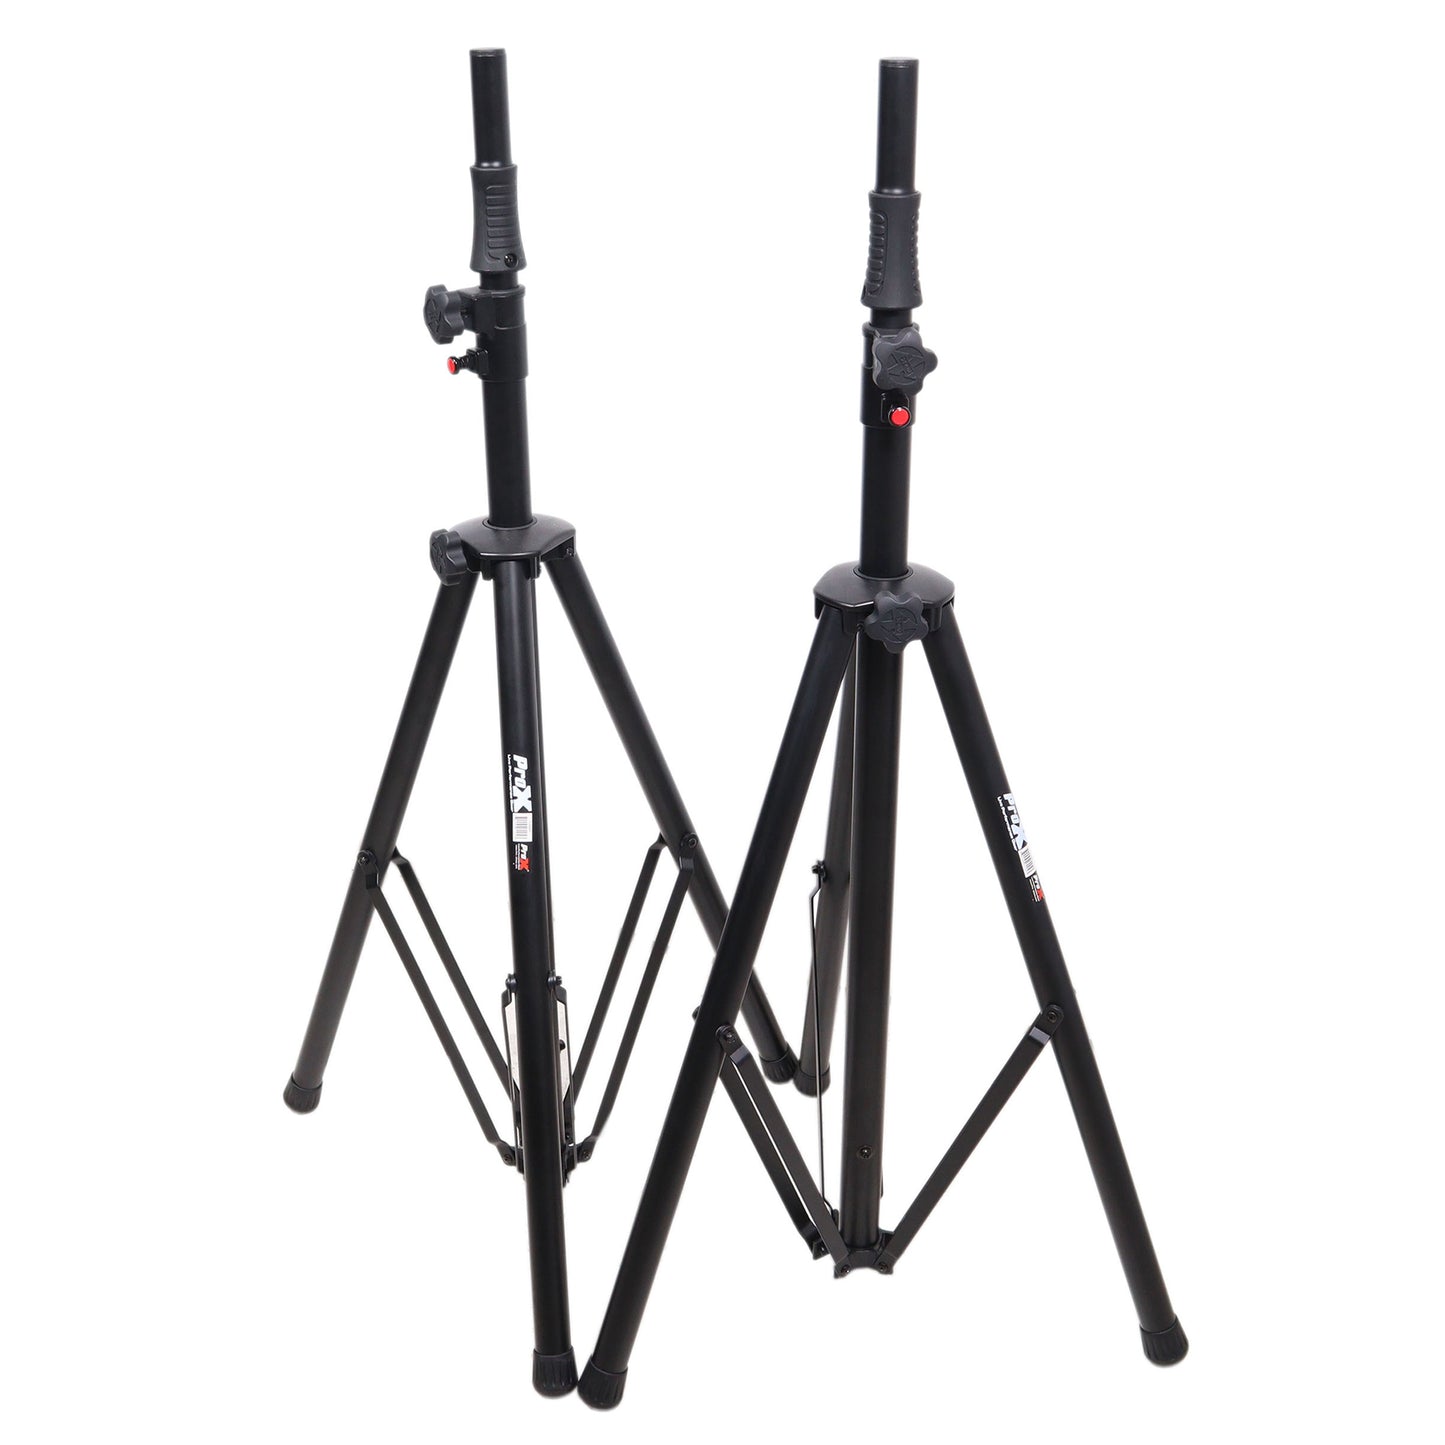 Pro Air Speaker stand in Black w/ Carry Bags